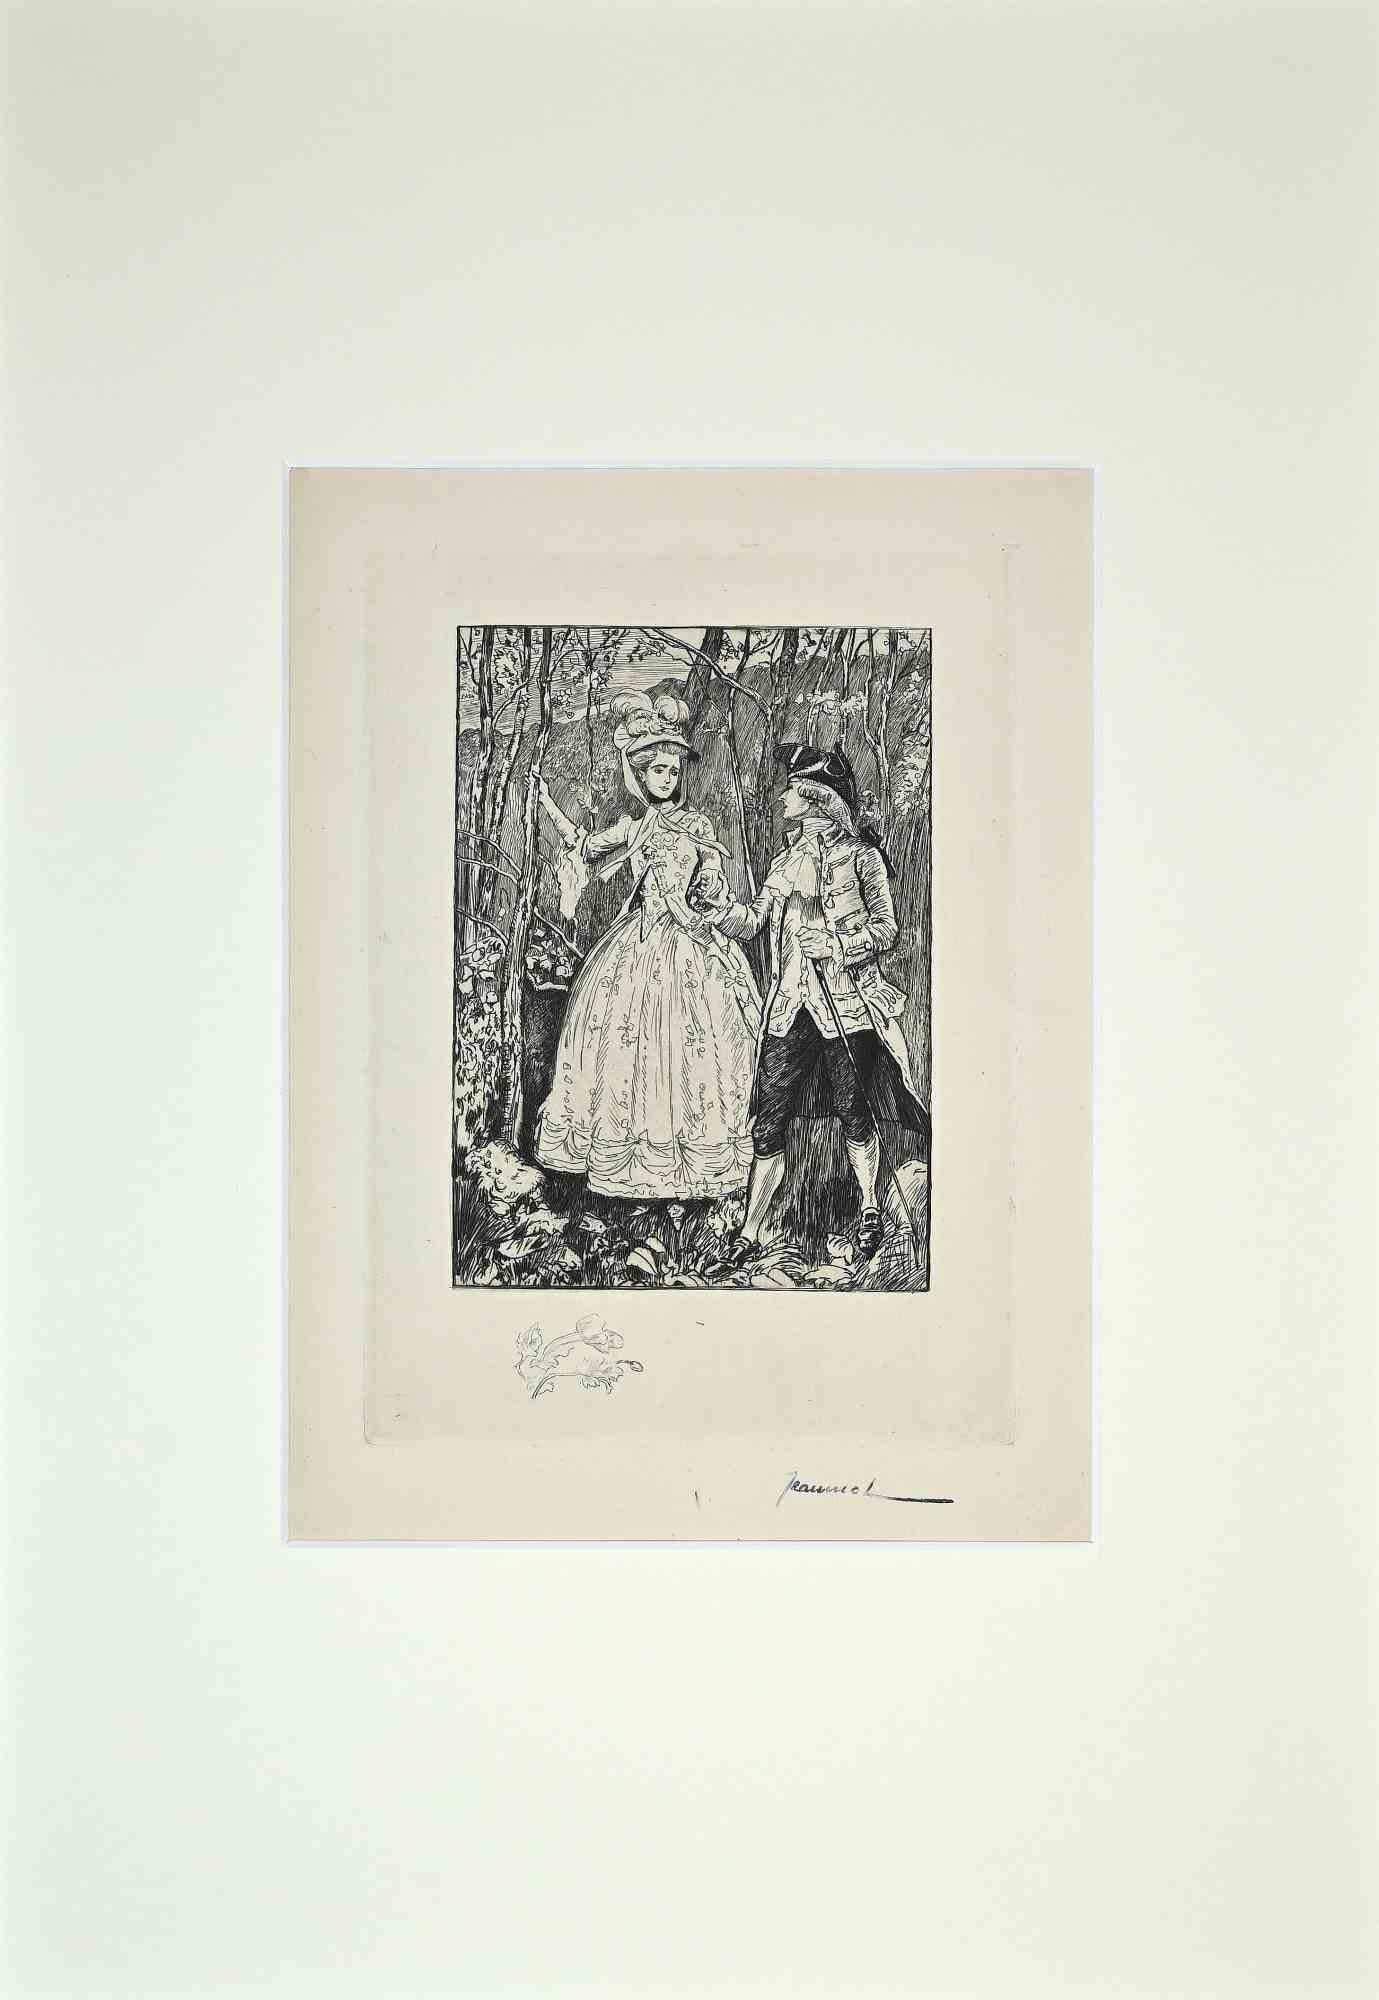 Pierre Georges Jeanniot Figurative Print - The Life of Casanova 3  - Etching by G. Jeanniot - Early 20th Century